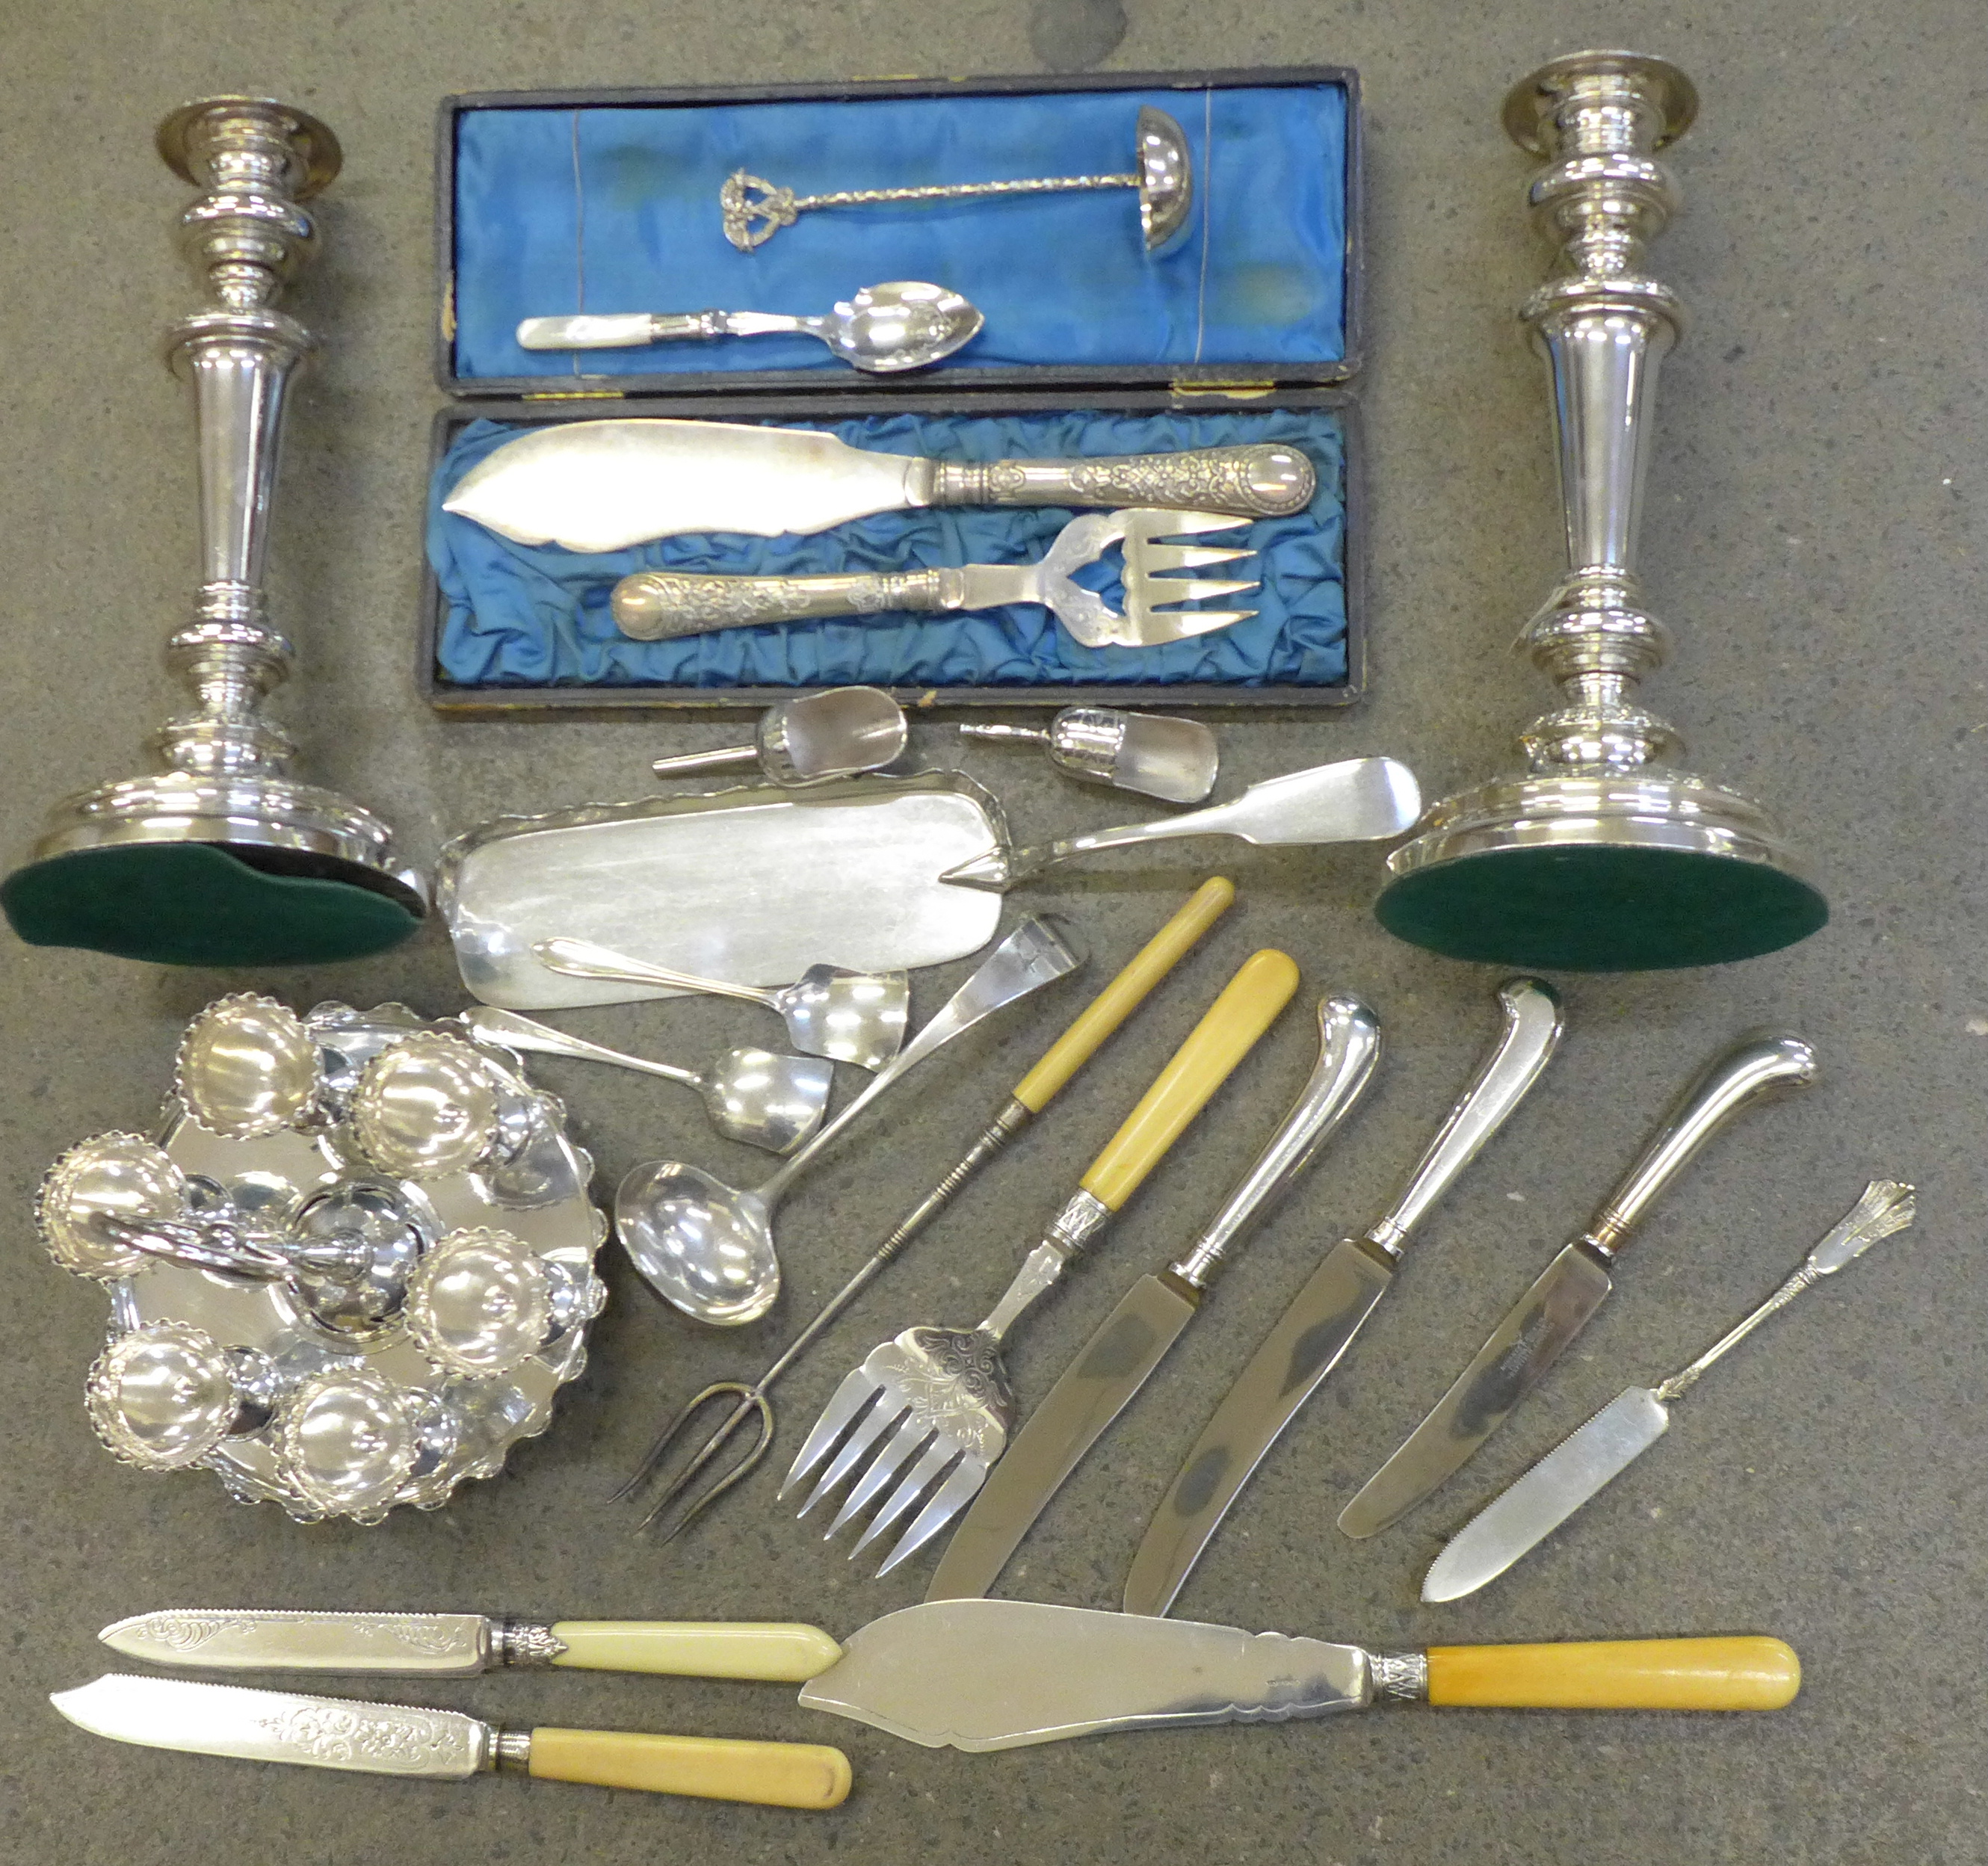 A collection of silver plate, candlesticks, an egg stand, etc.